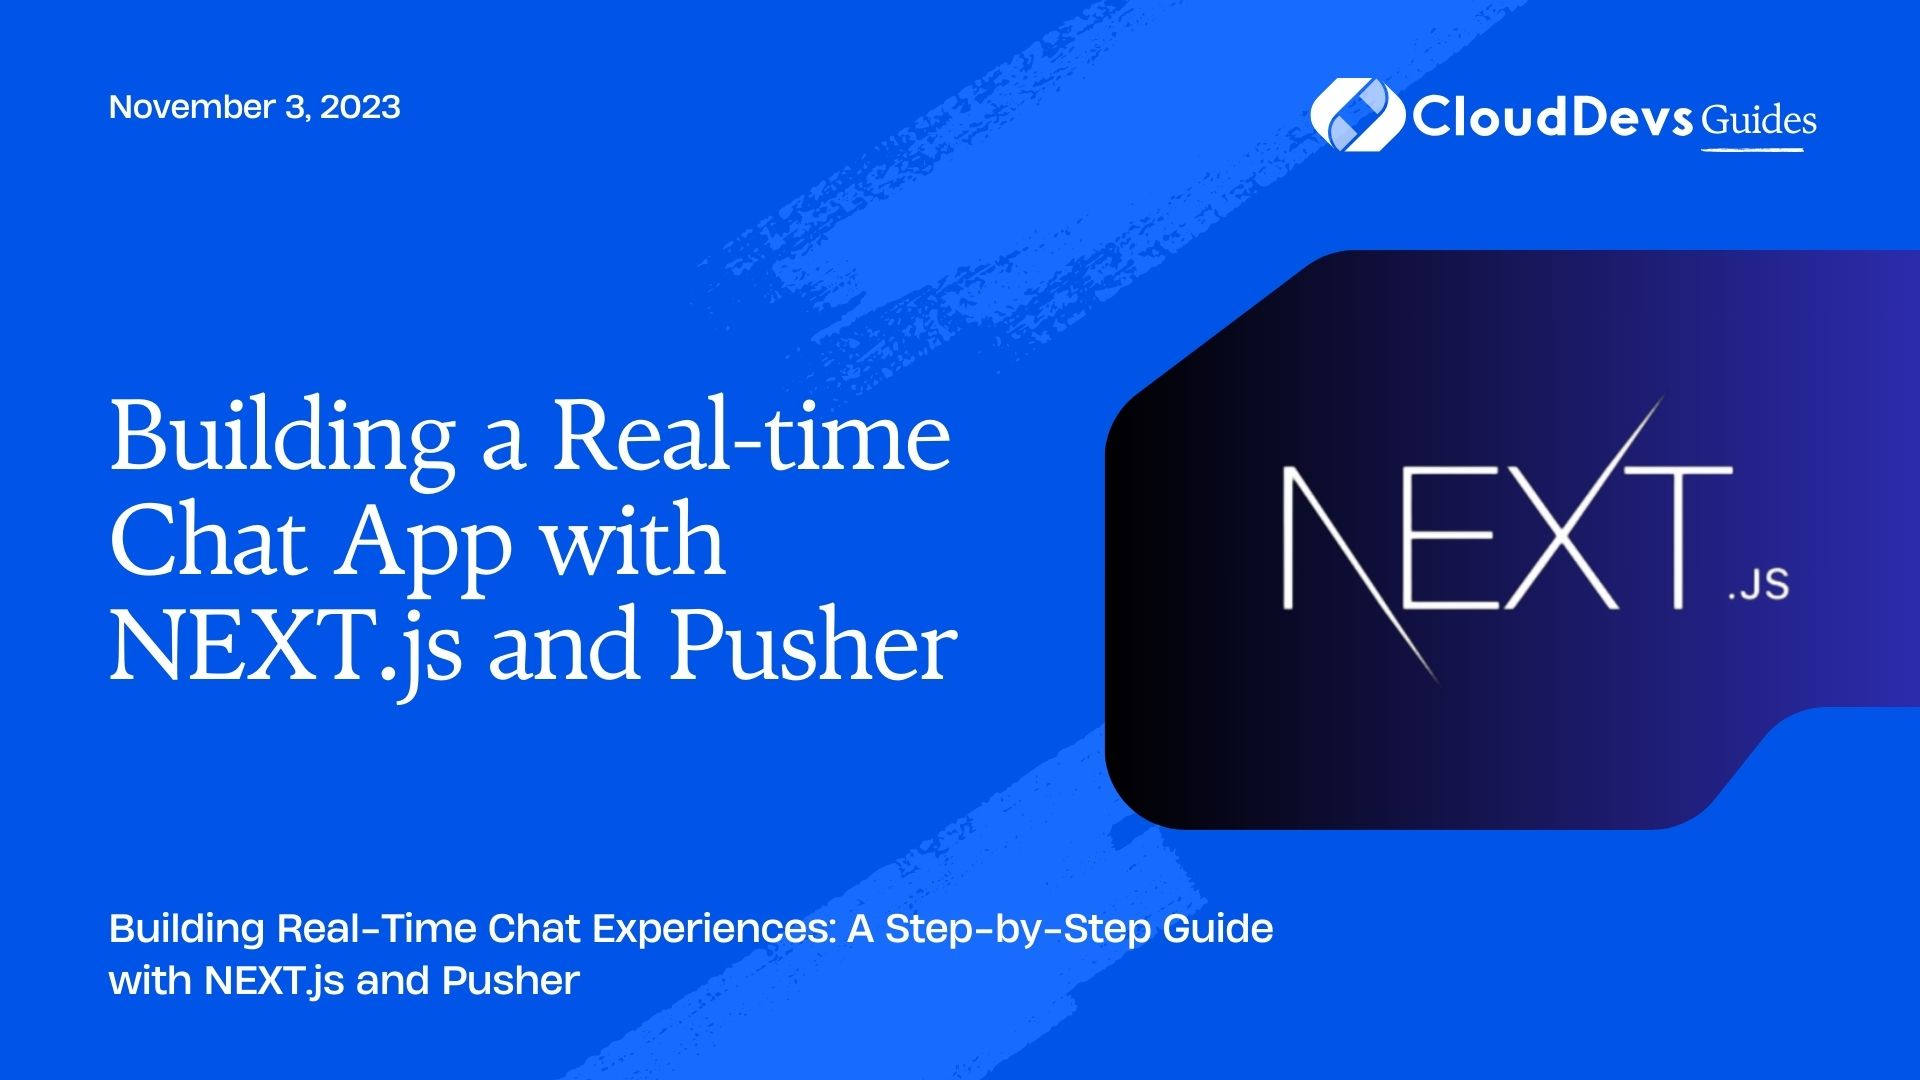 Building a Real-time Chat App with NEXT.js and Pusher